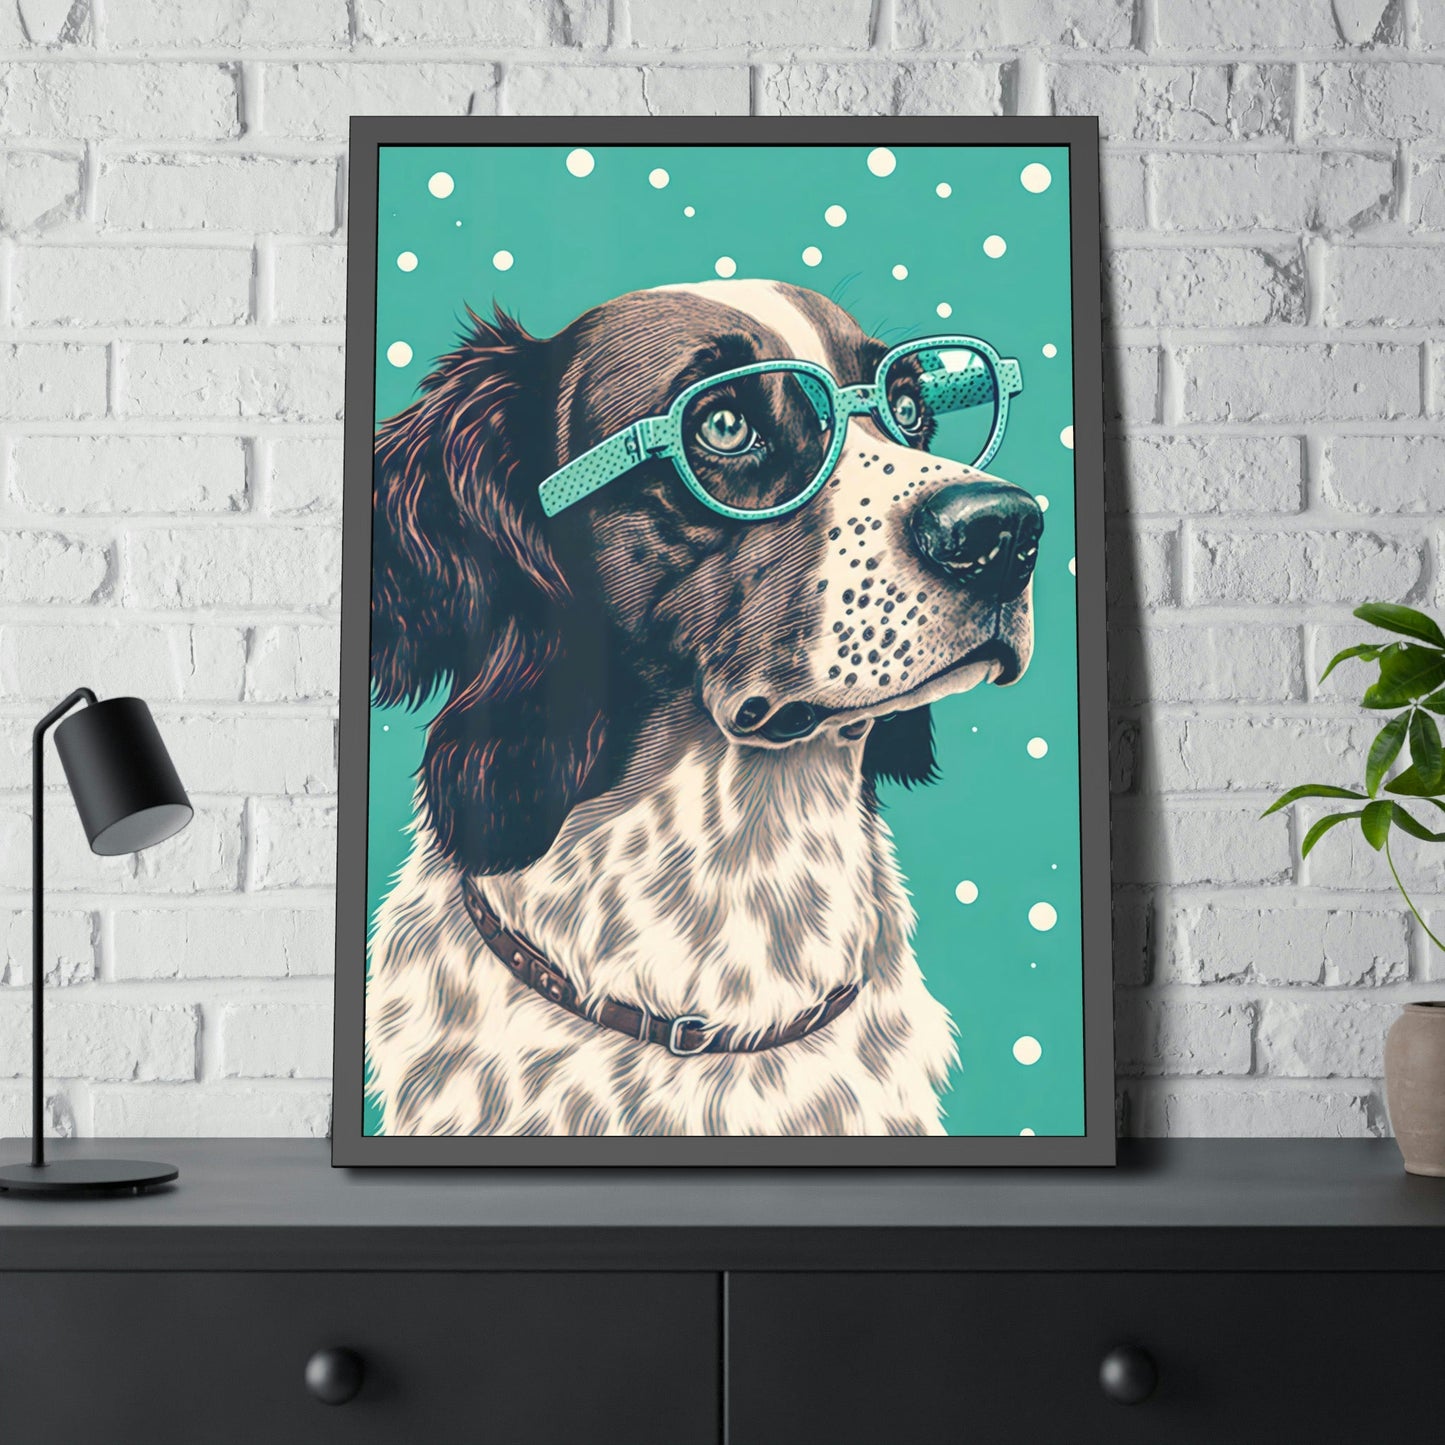 Playful Pooch: Print on Canvas of a Fun-Loving Dog on Framed Canvas